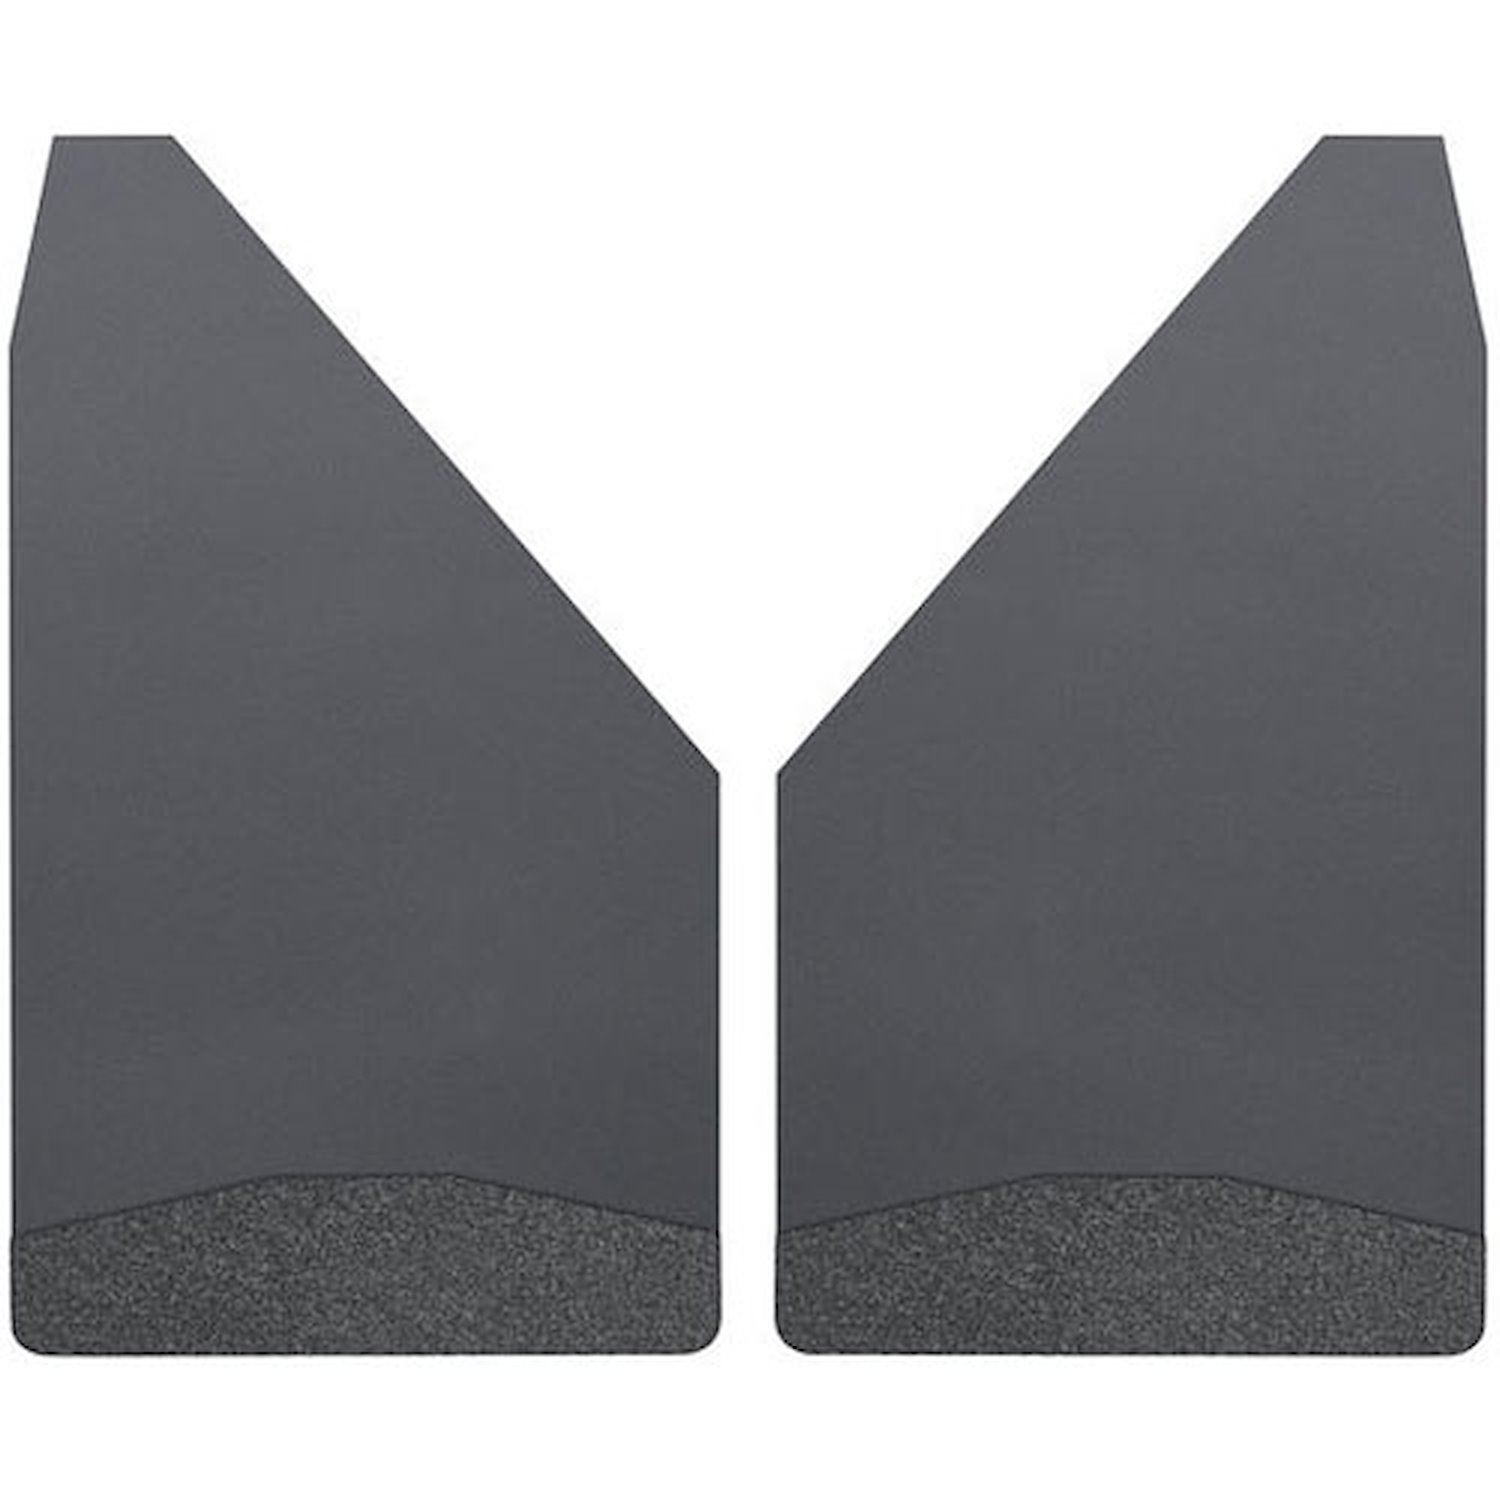 Kick Back Mud Flaps 12 Inches Wide